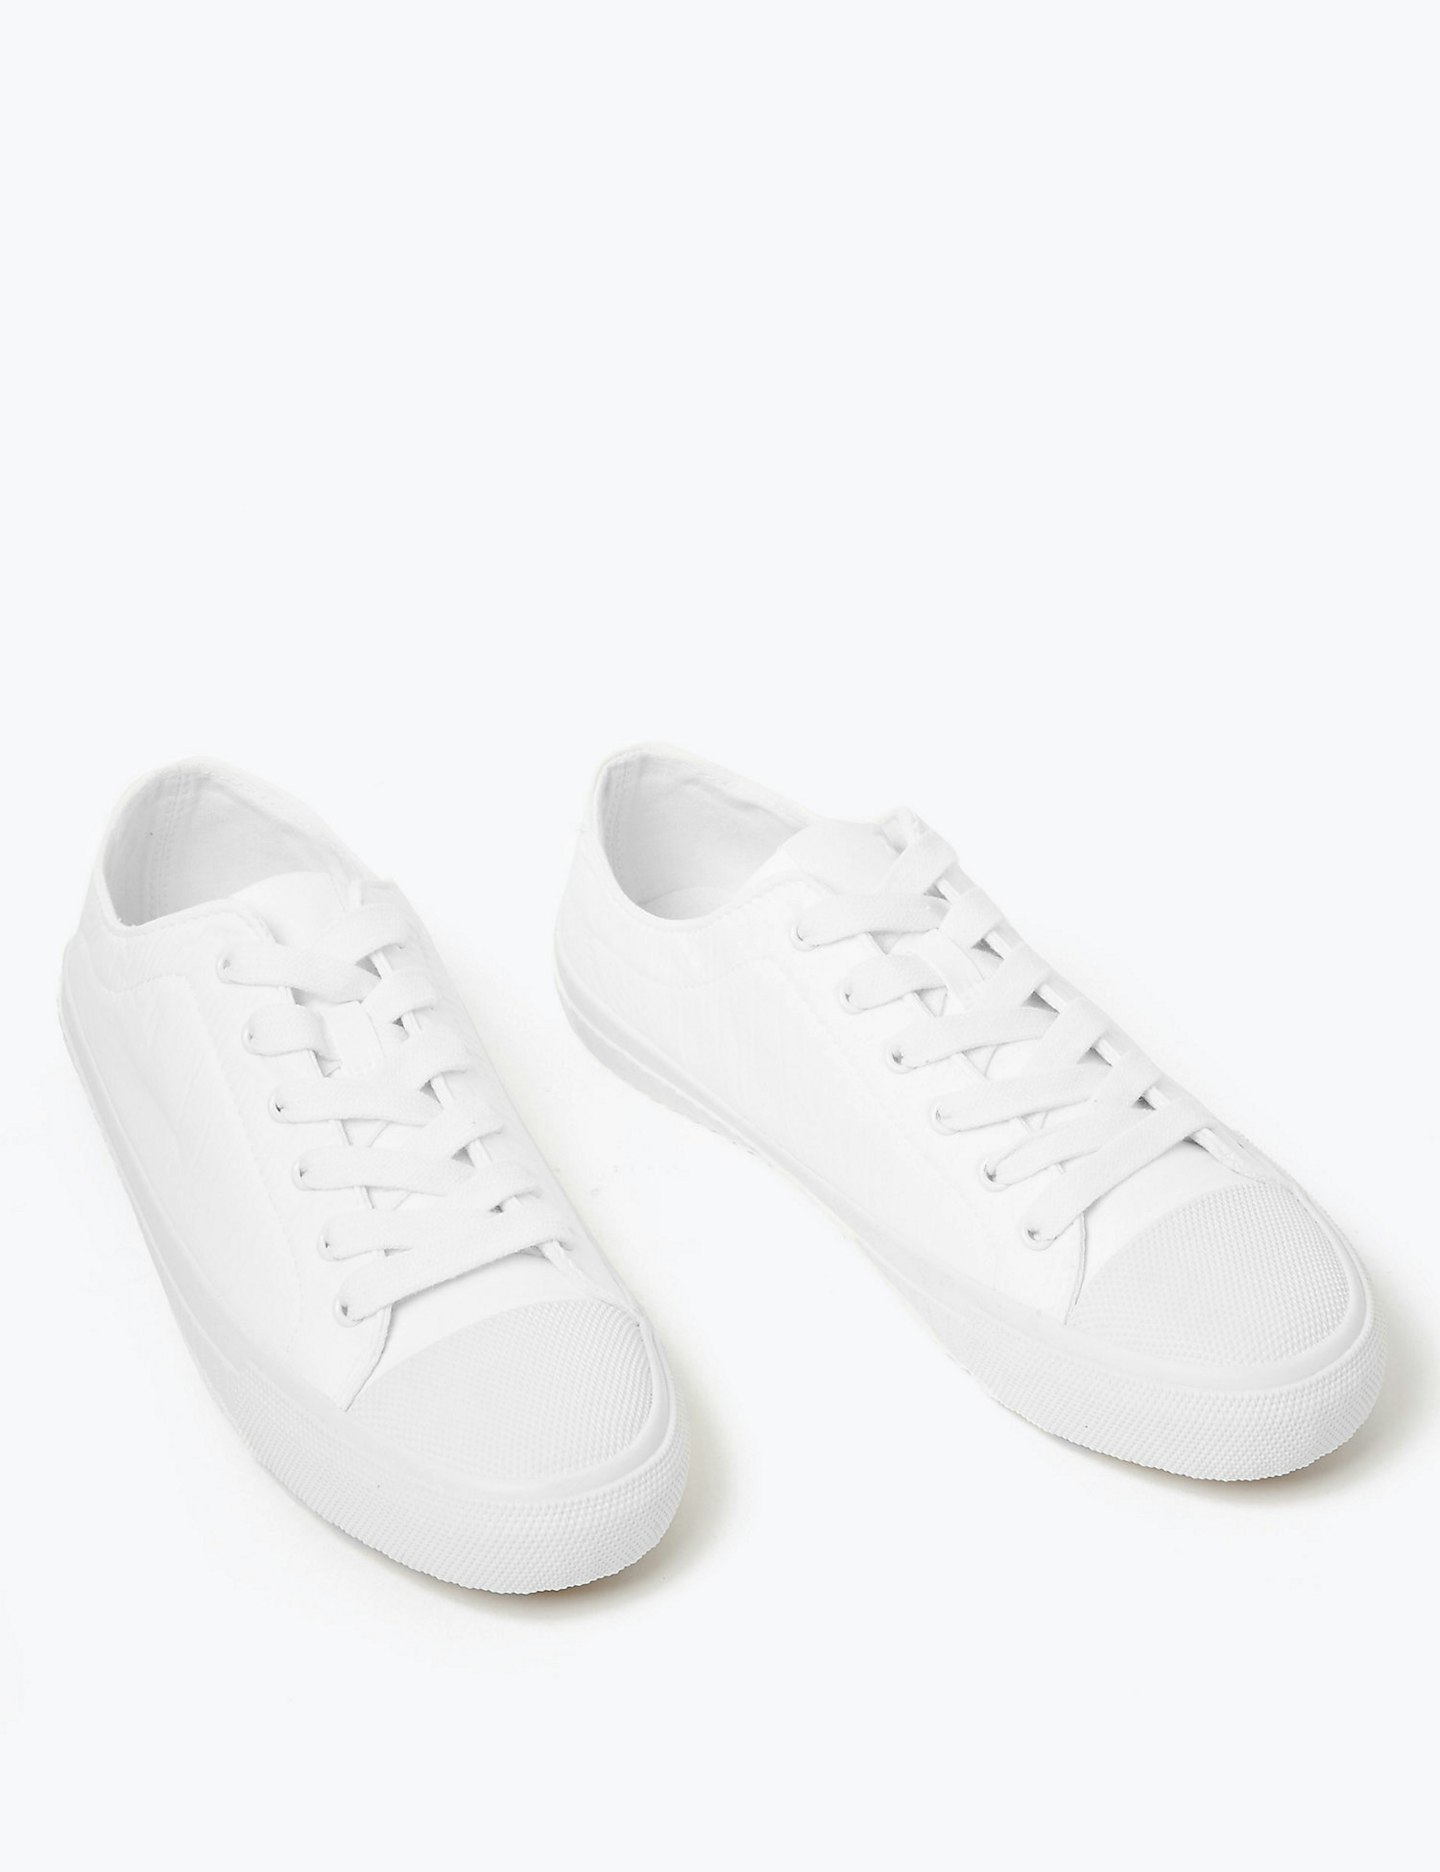 M&S, White Lace-Up Trainers